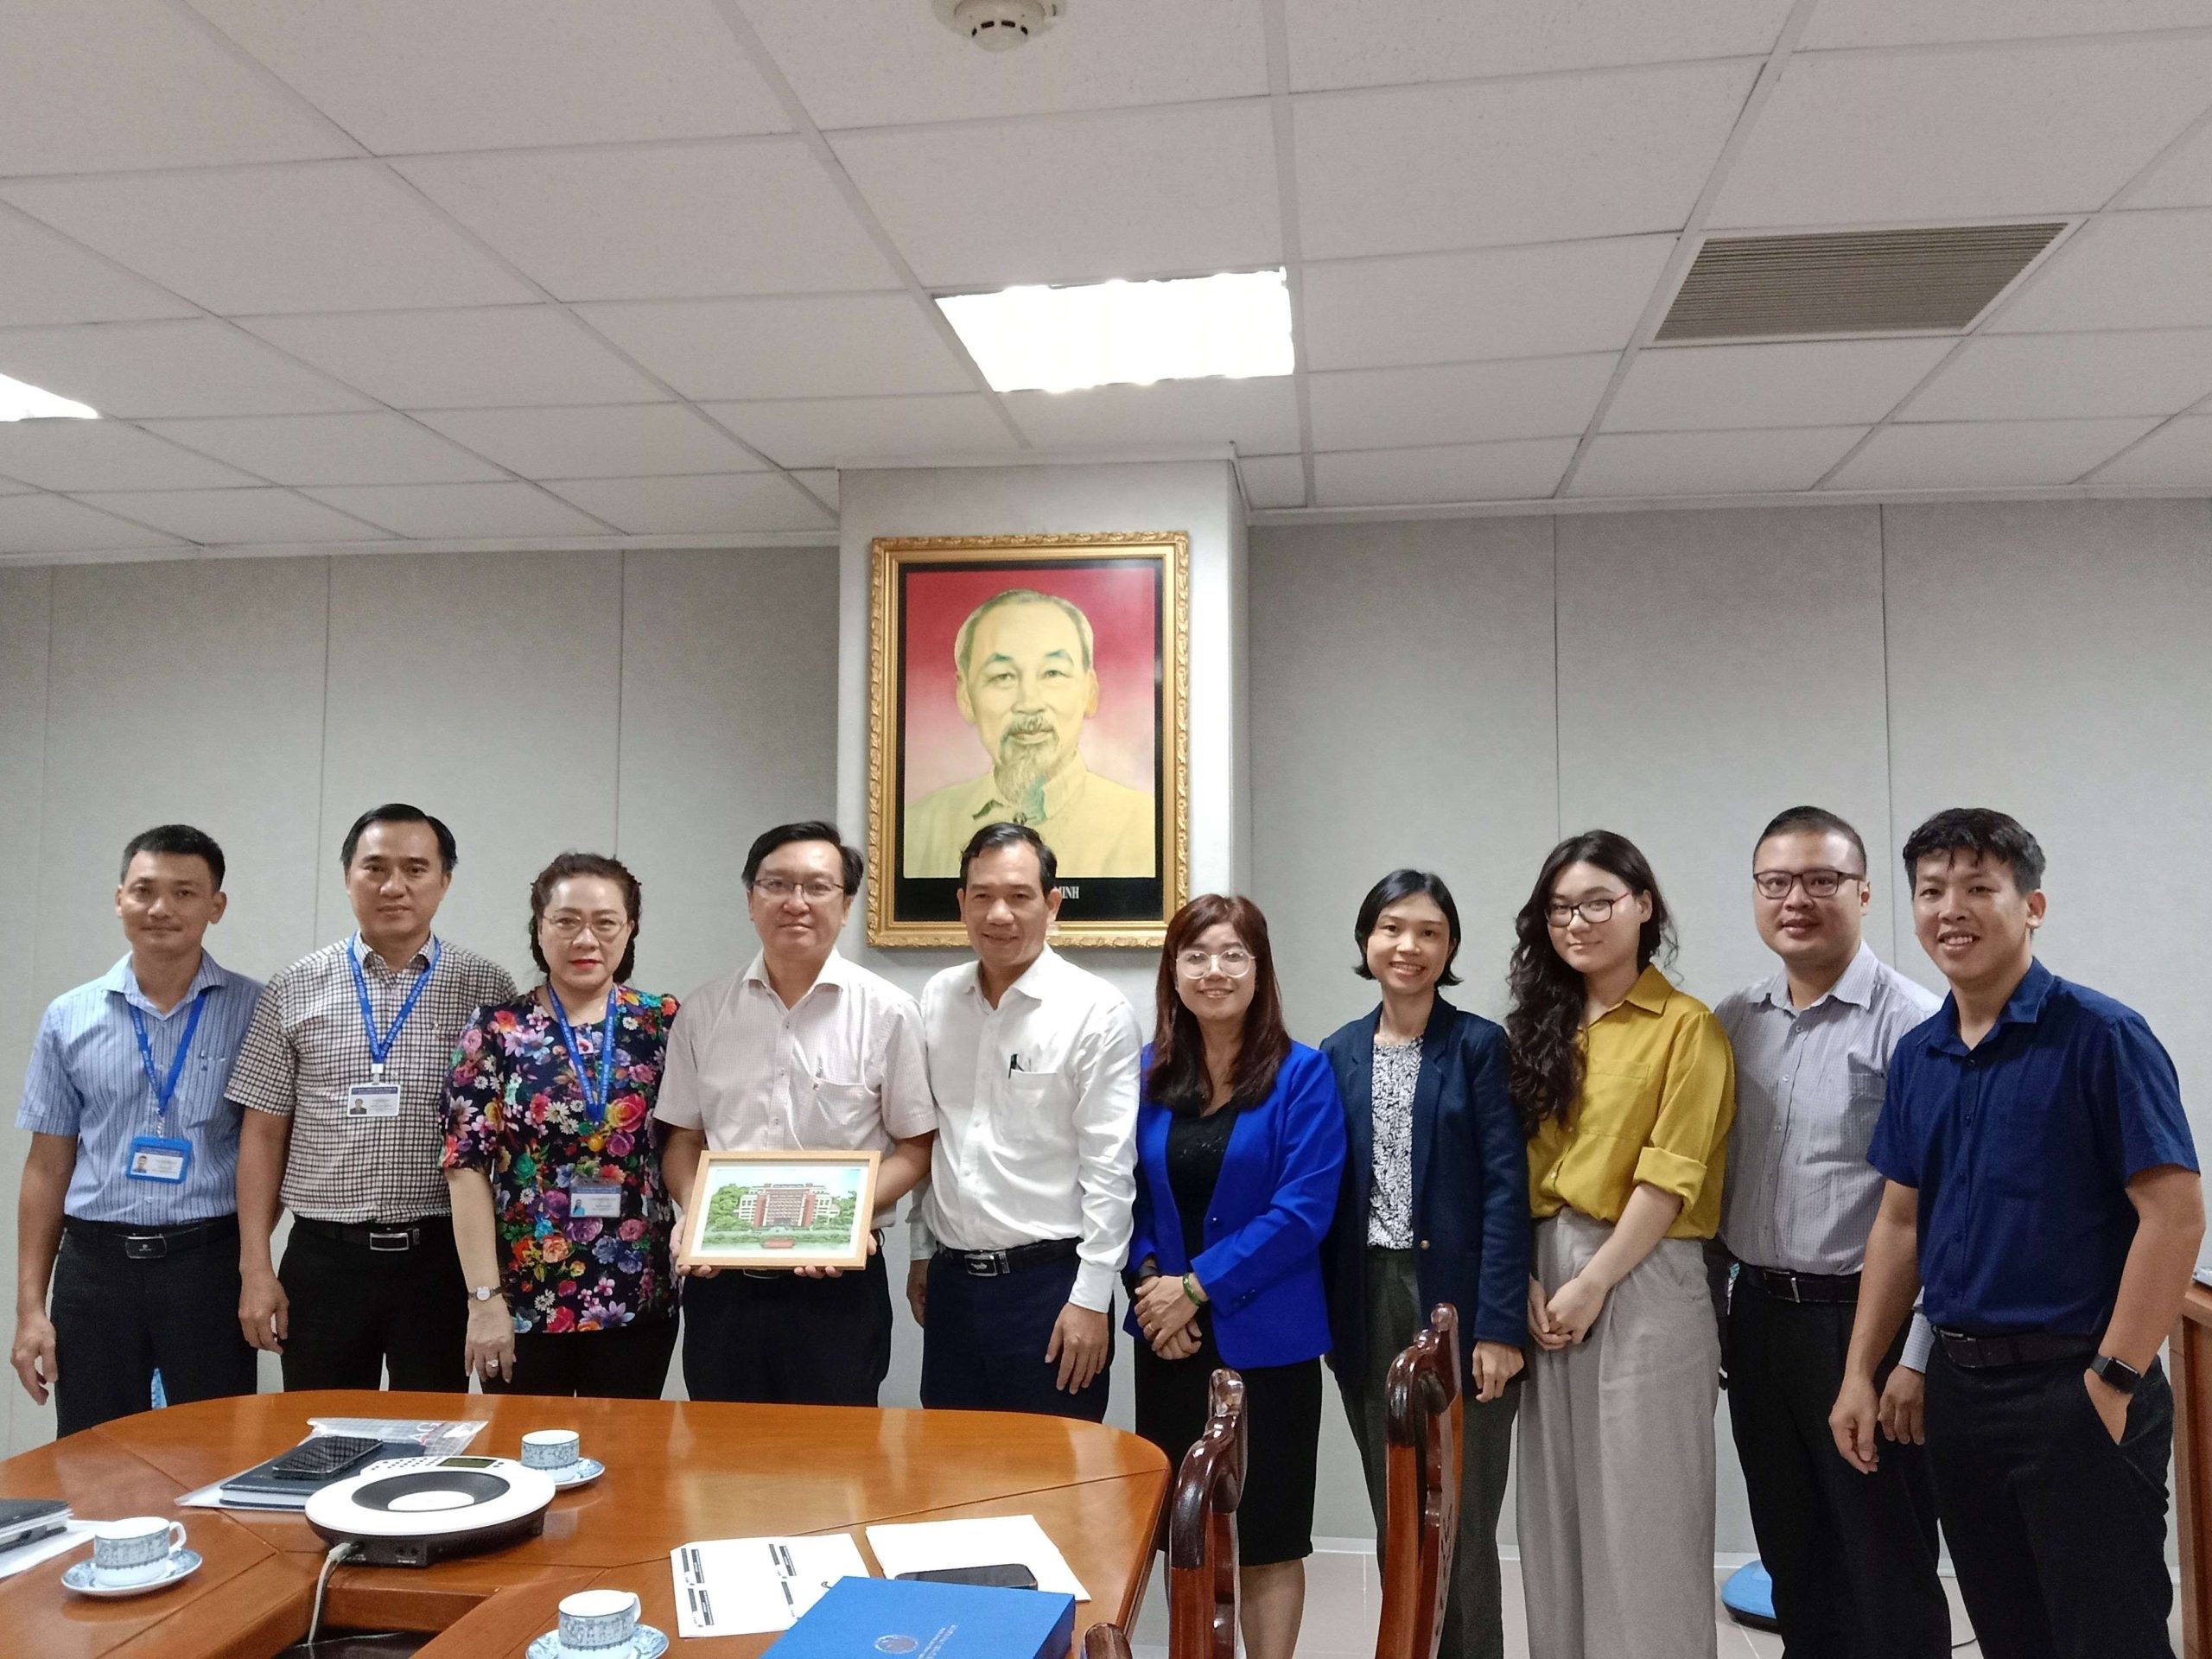 THE PROGRAM “TOWARD THE SUSTAINABLE COMMUNITY DEVELOPMENT” FOR THE COMMUNITY OF HIGH SCHOOL STUDENTS WILL BE IMPLEMENTED IN HO CHI MINH CITY